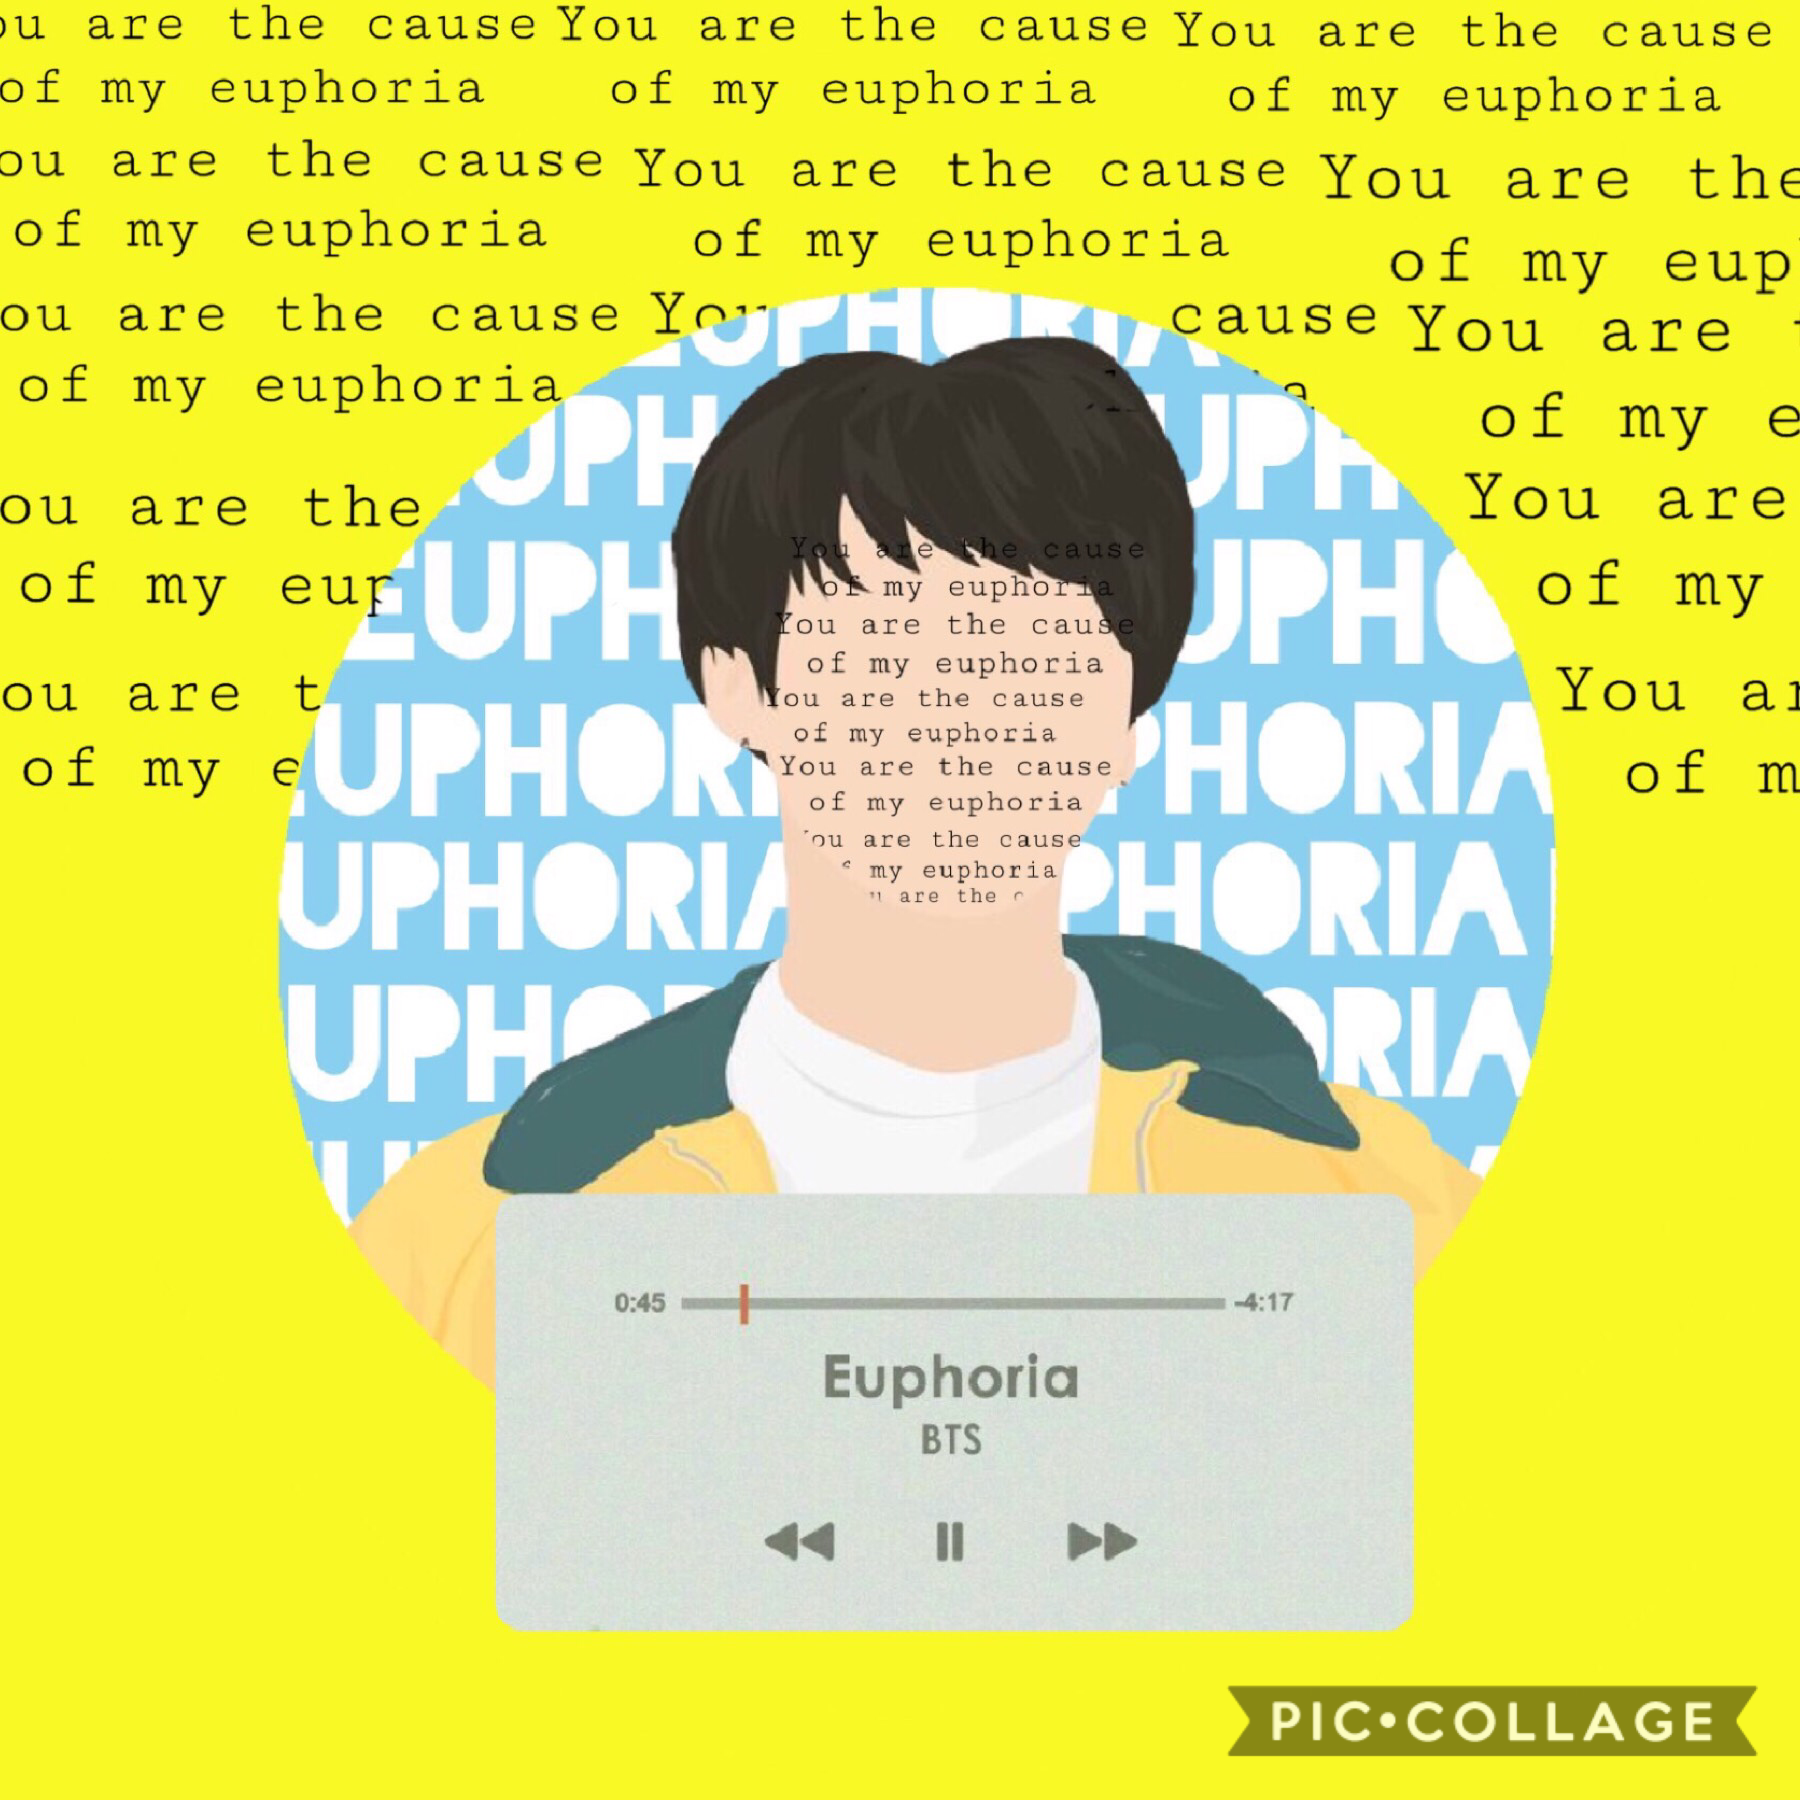 tAppppp



Random euphoria edit I made on picsart

Btw go follow me @in-euphoria



qotd: what ice cream flavour would you be and why



aotd:min chelate chip. Unique, extra but still lovable



Btw stream euphoria. Let’s aim for 200m before kookies b-day